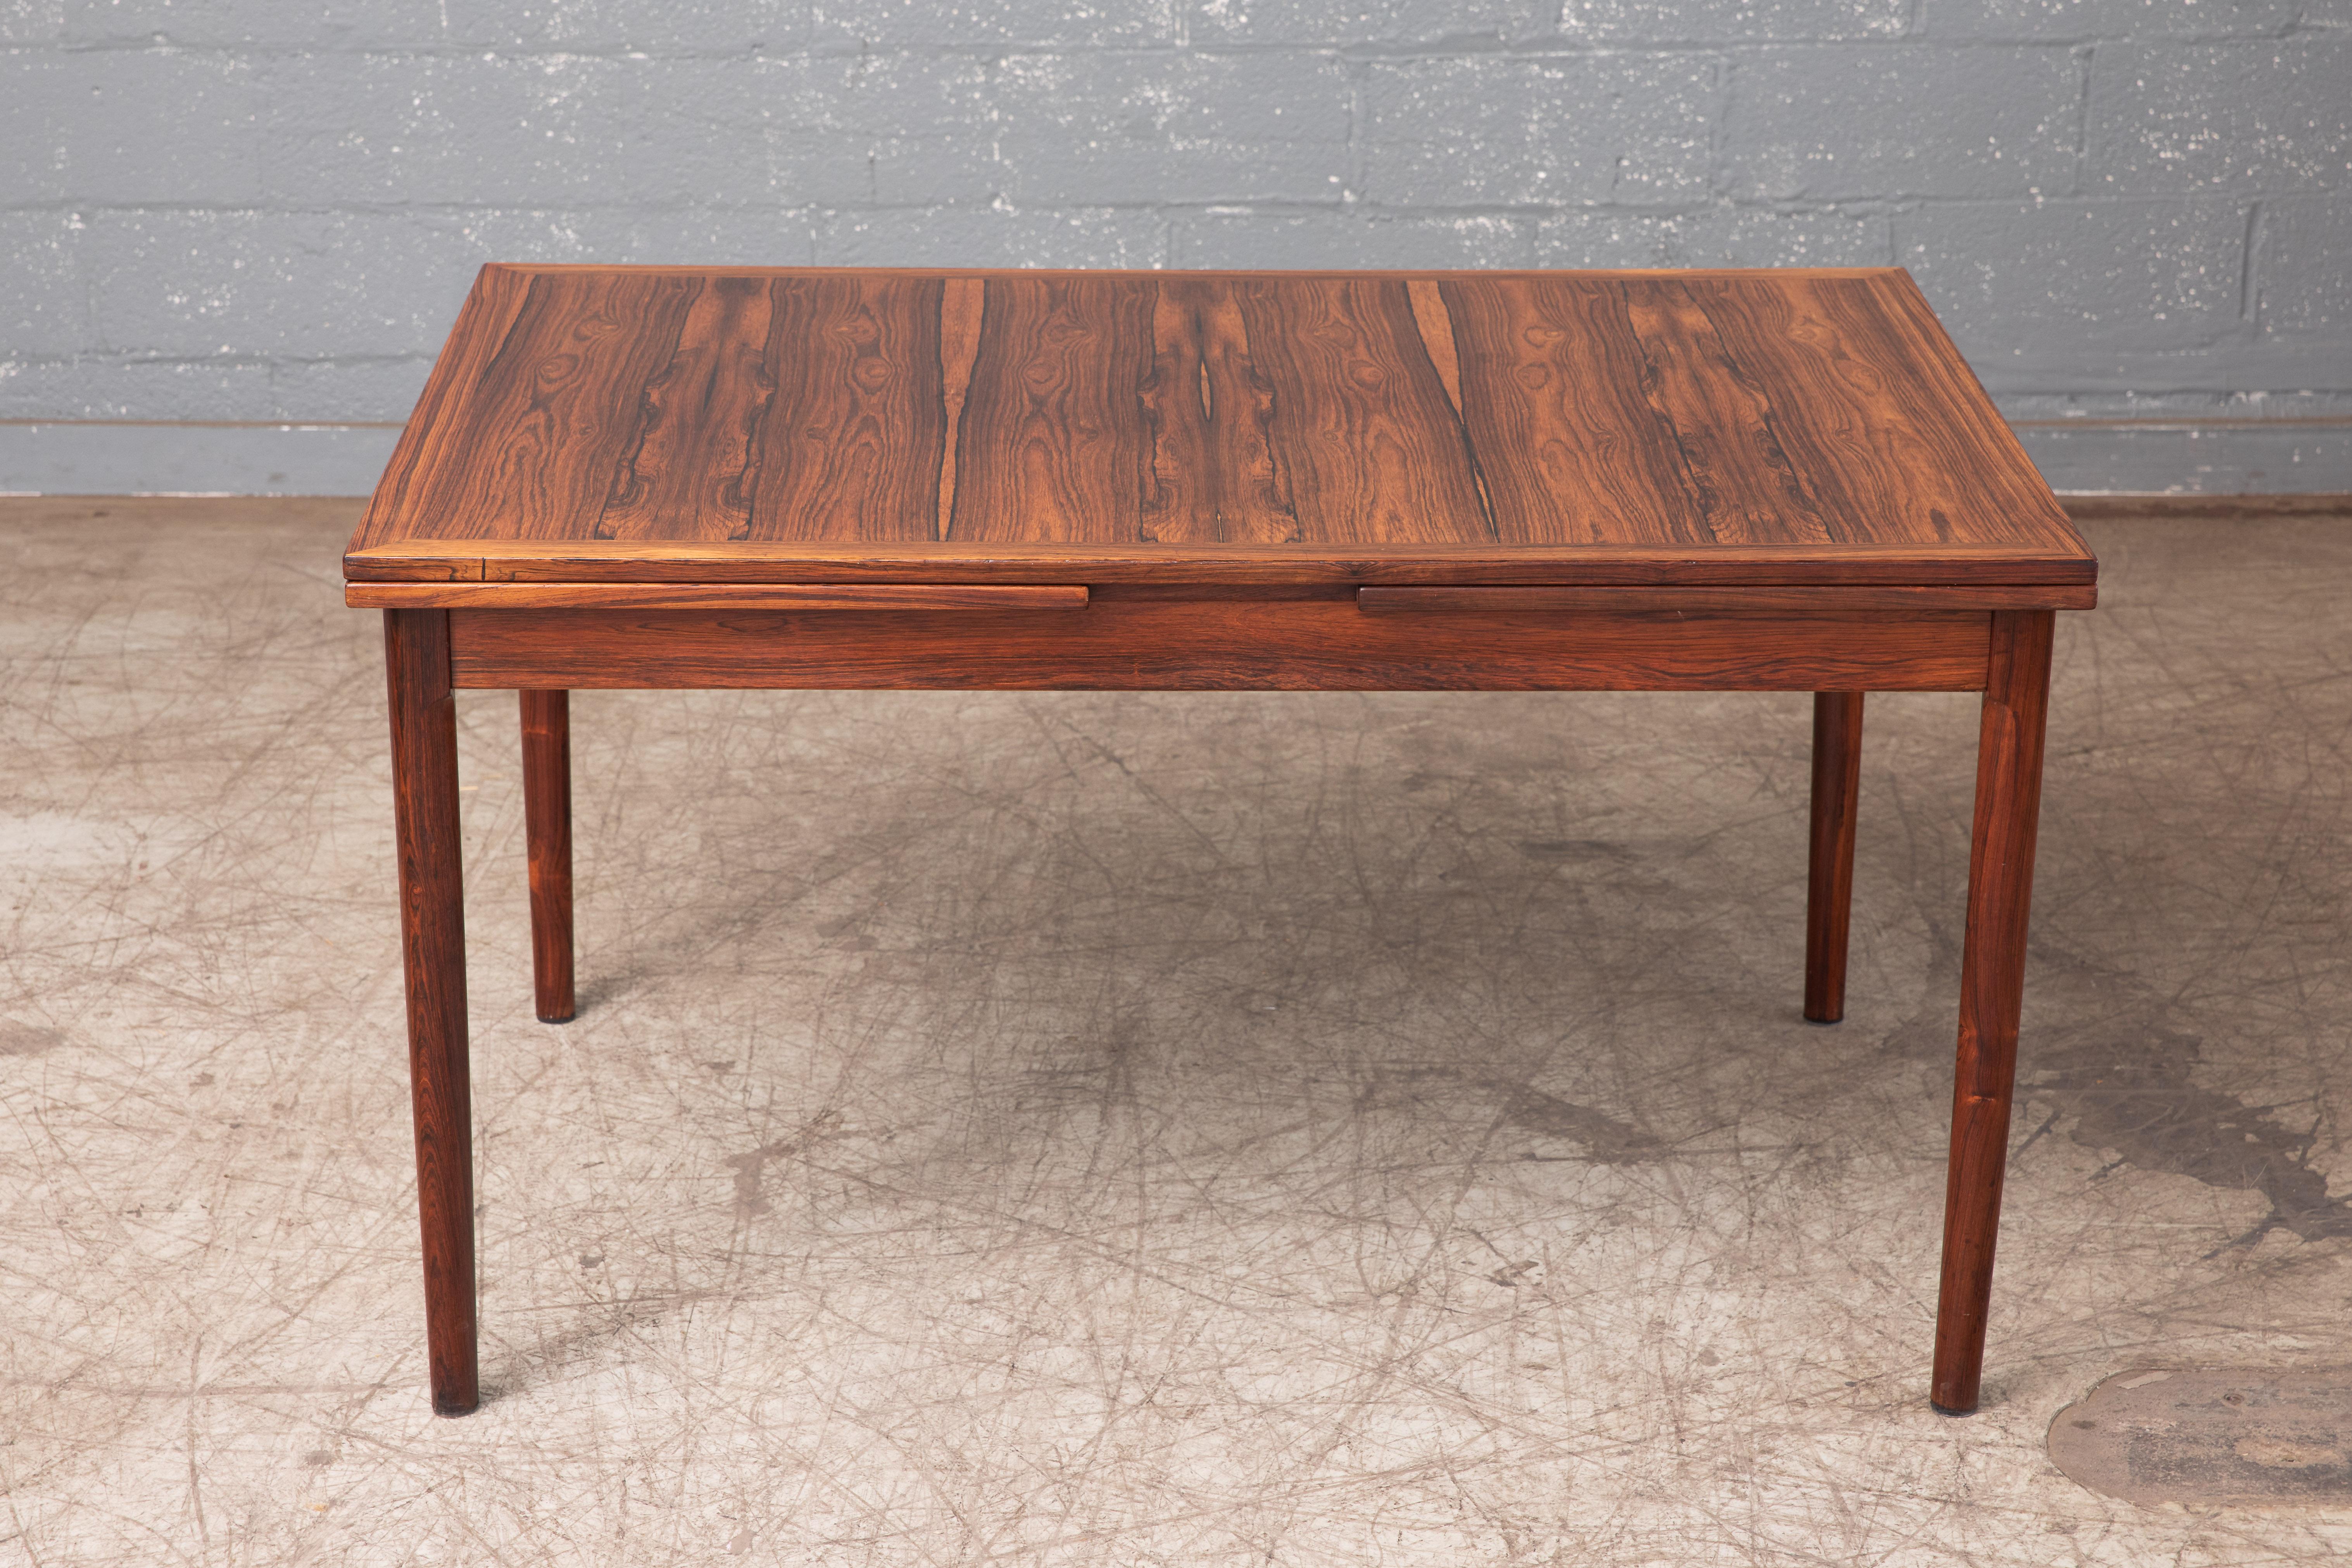 A stunning Danish midcentury rosewood draw leaf dining table made in Denmark in the 1960s. Features beautiful rosewood grain with solid thick edges and sculpted legs. Expandable with two draw leaves to comfortably seat up to ten people for dinner.